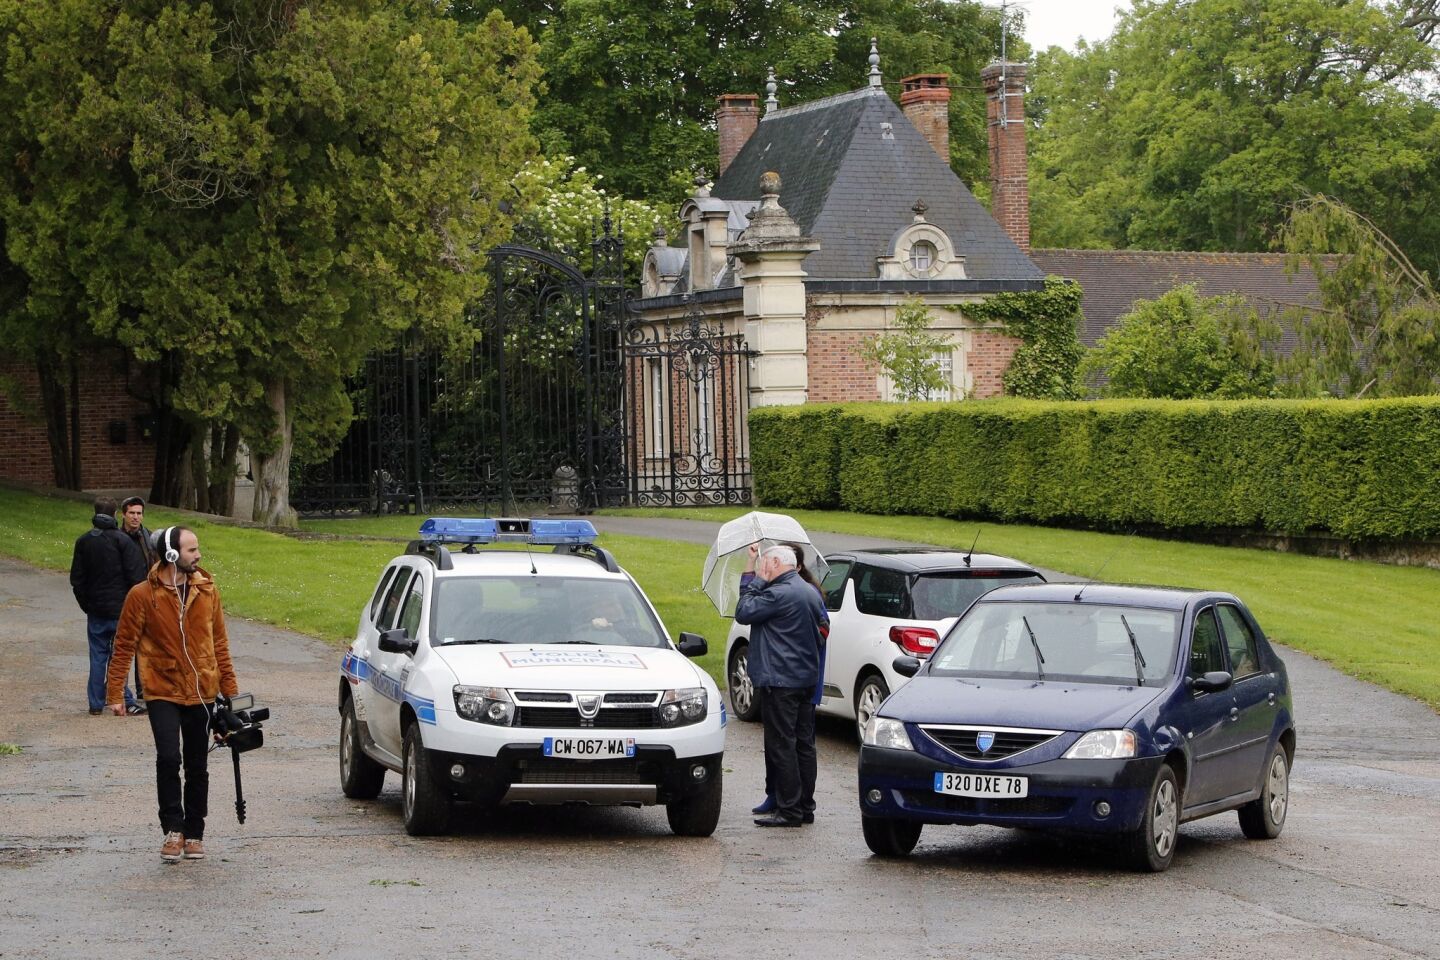 A police car, onlookers and the media gather in front of the entrance of fashion designer Valentino's Chateau de Wideville, 35 miles west of Paris, where Kim Kardashian and Kanye West were expected for a brunch on May 23.